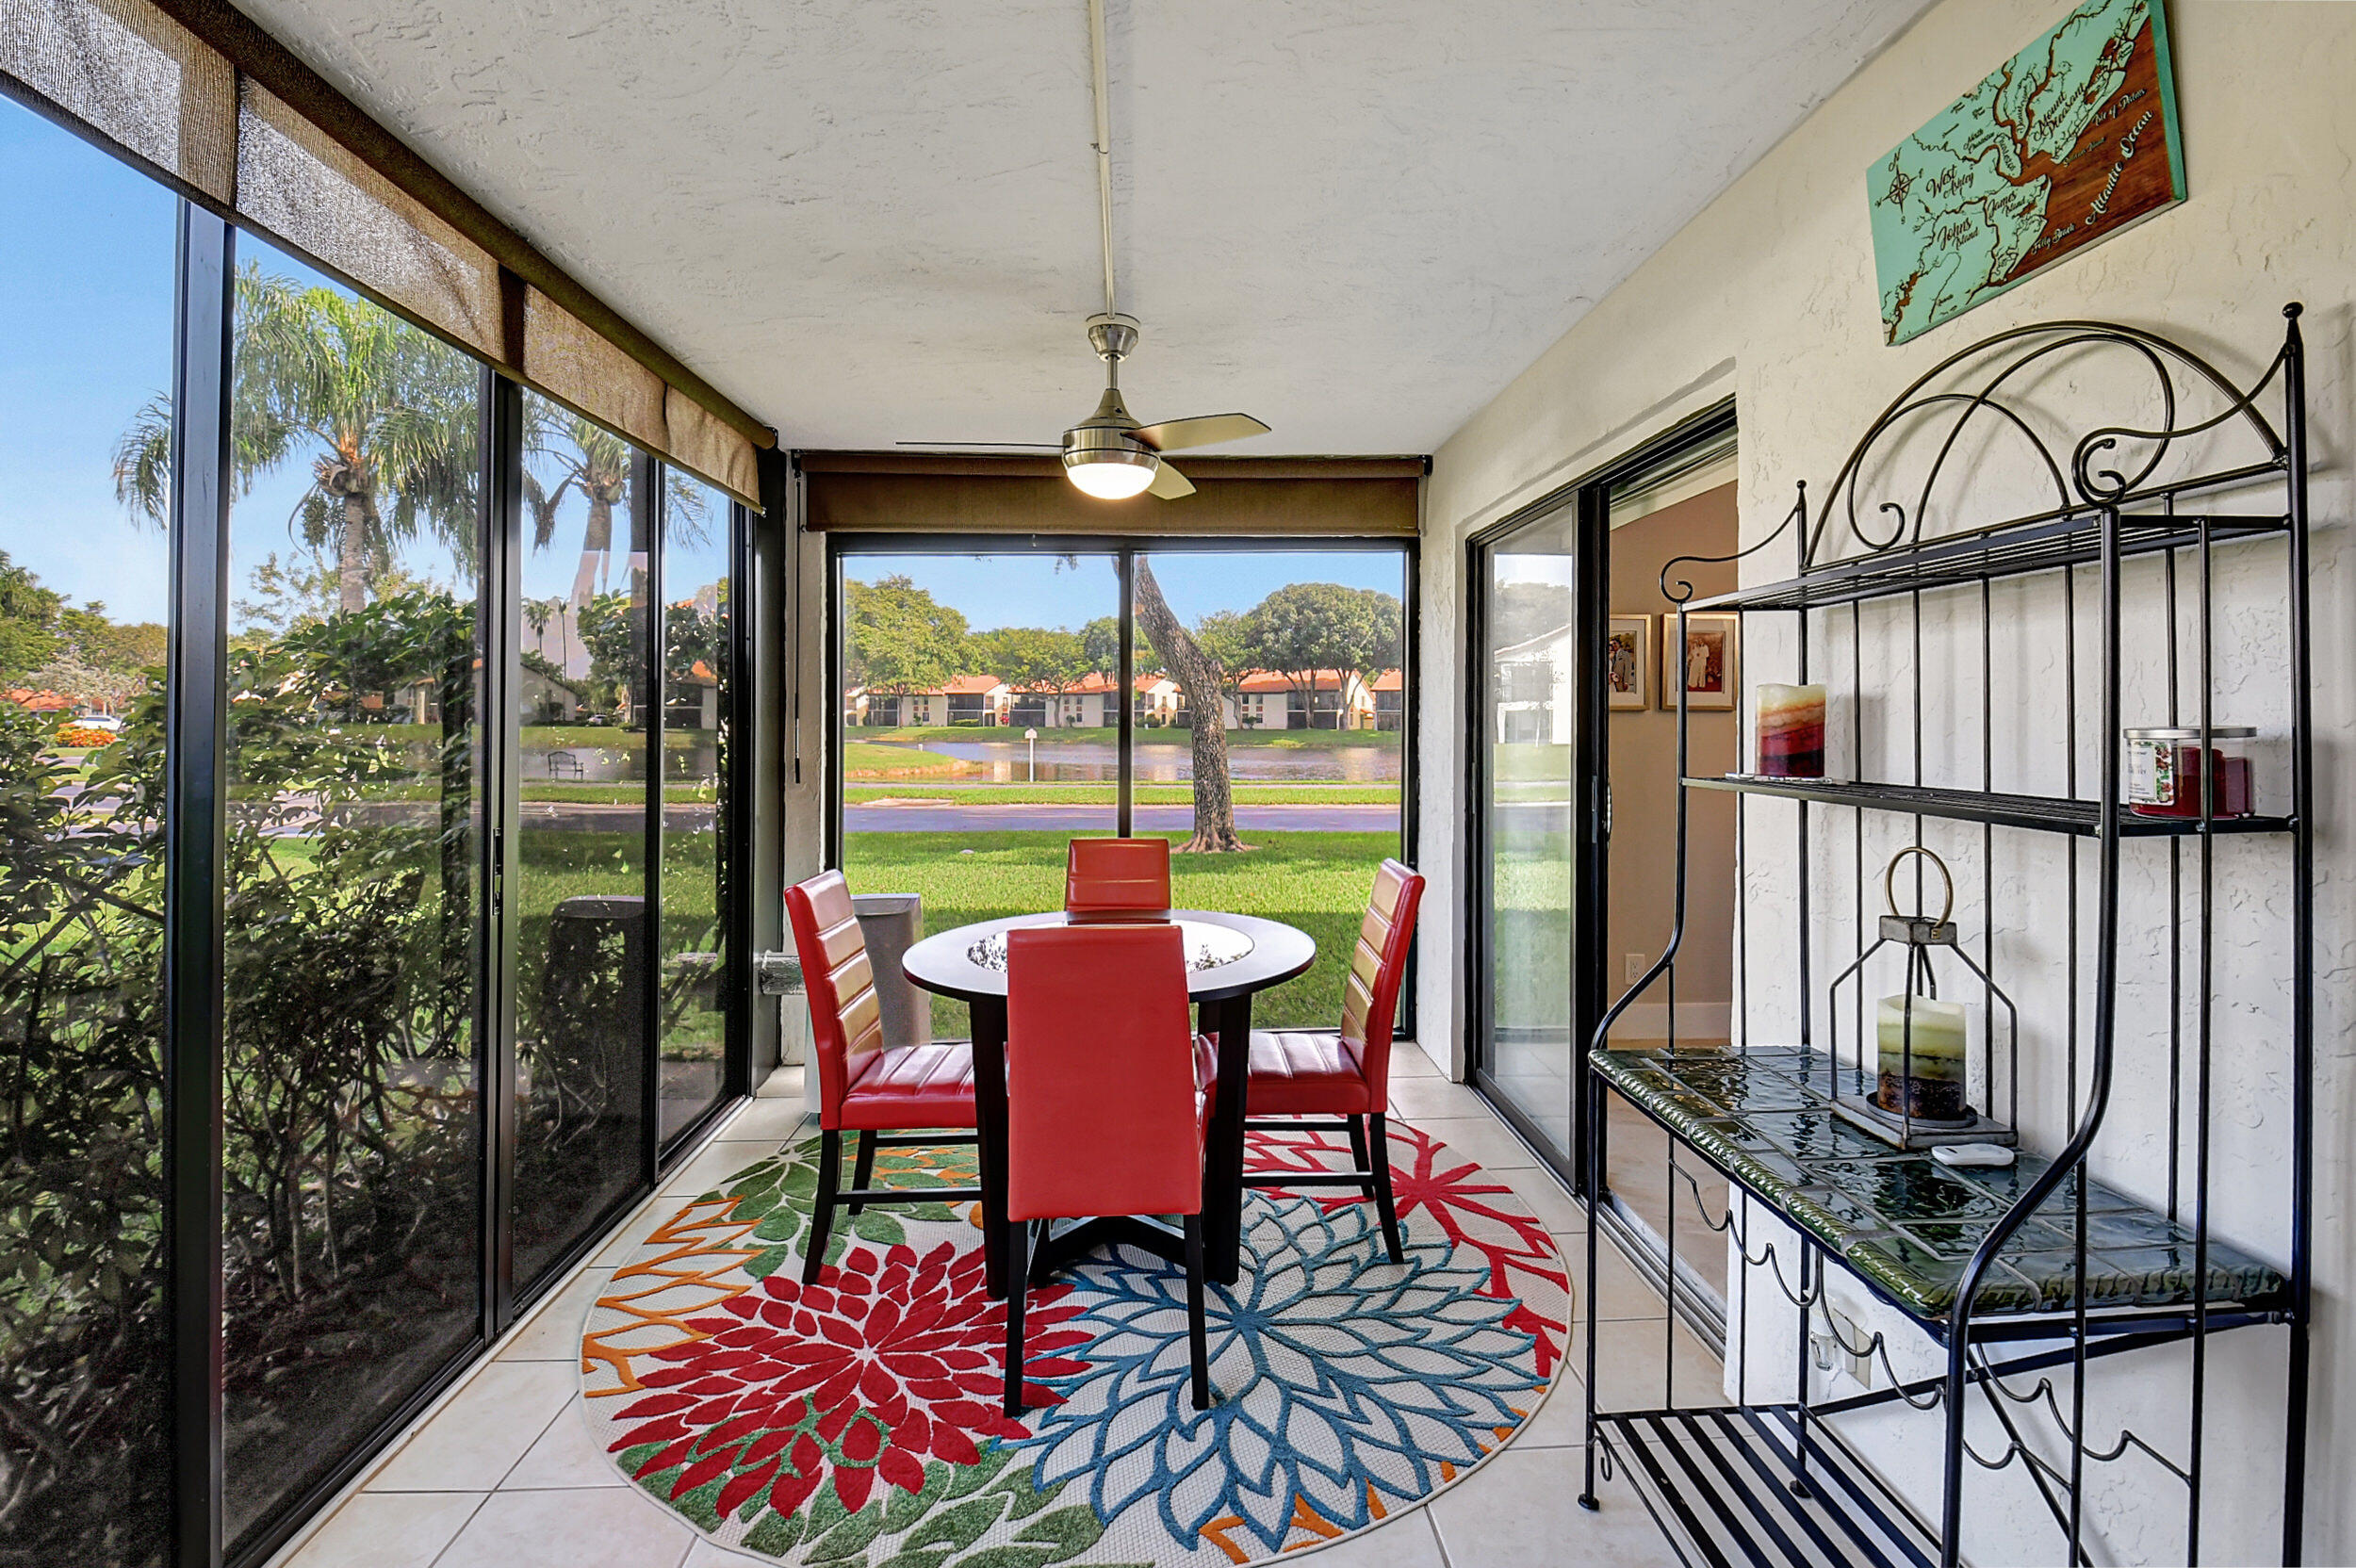 RELAX IN THIS GLASS ENCLOSED A/C LANAI!